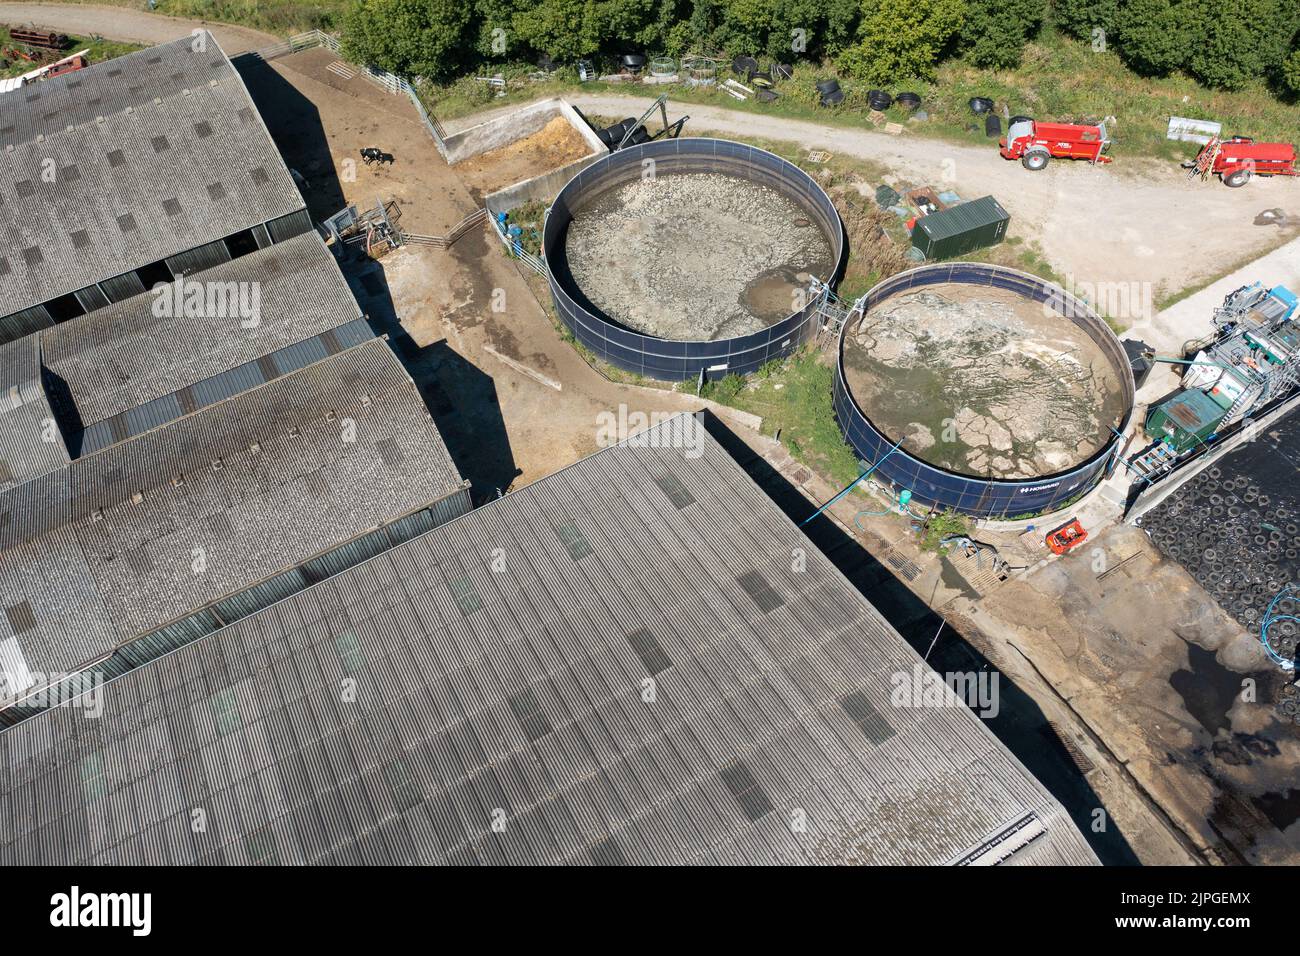 Aerial view of dairy farm showing slurry tanks, Towy Valley, Carmarthenshire, Wales, UK Stock Photo